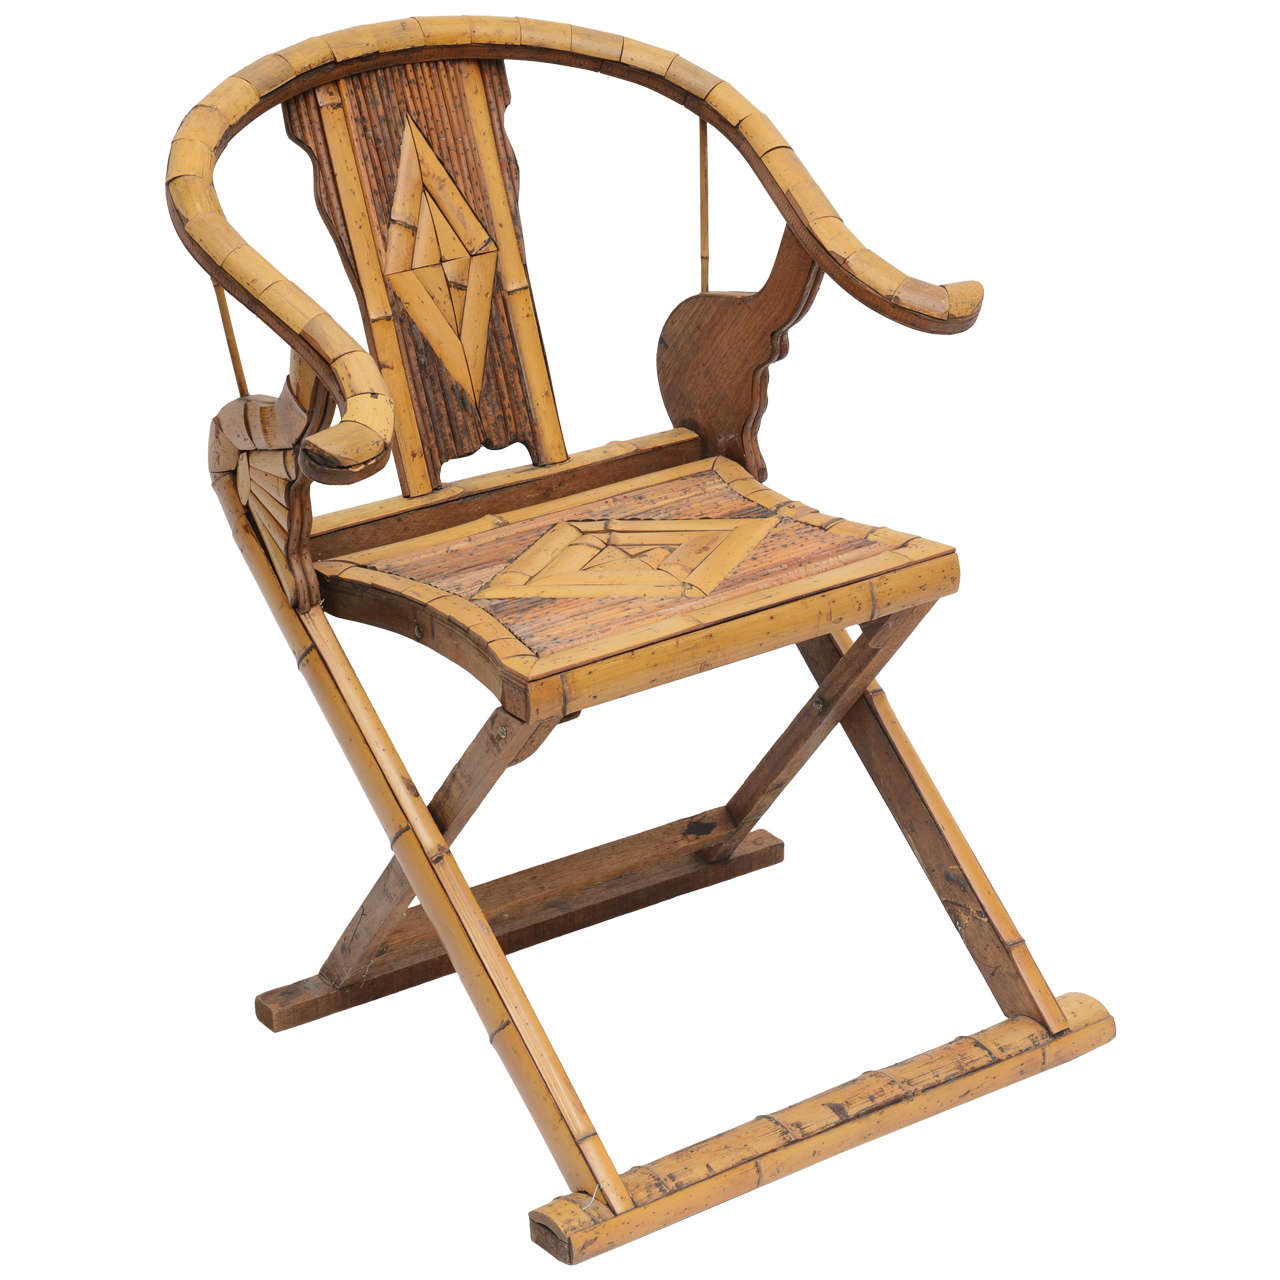 Bamboo Folding Chair For Sale